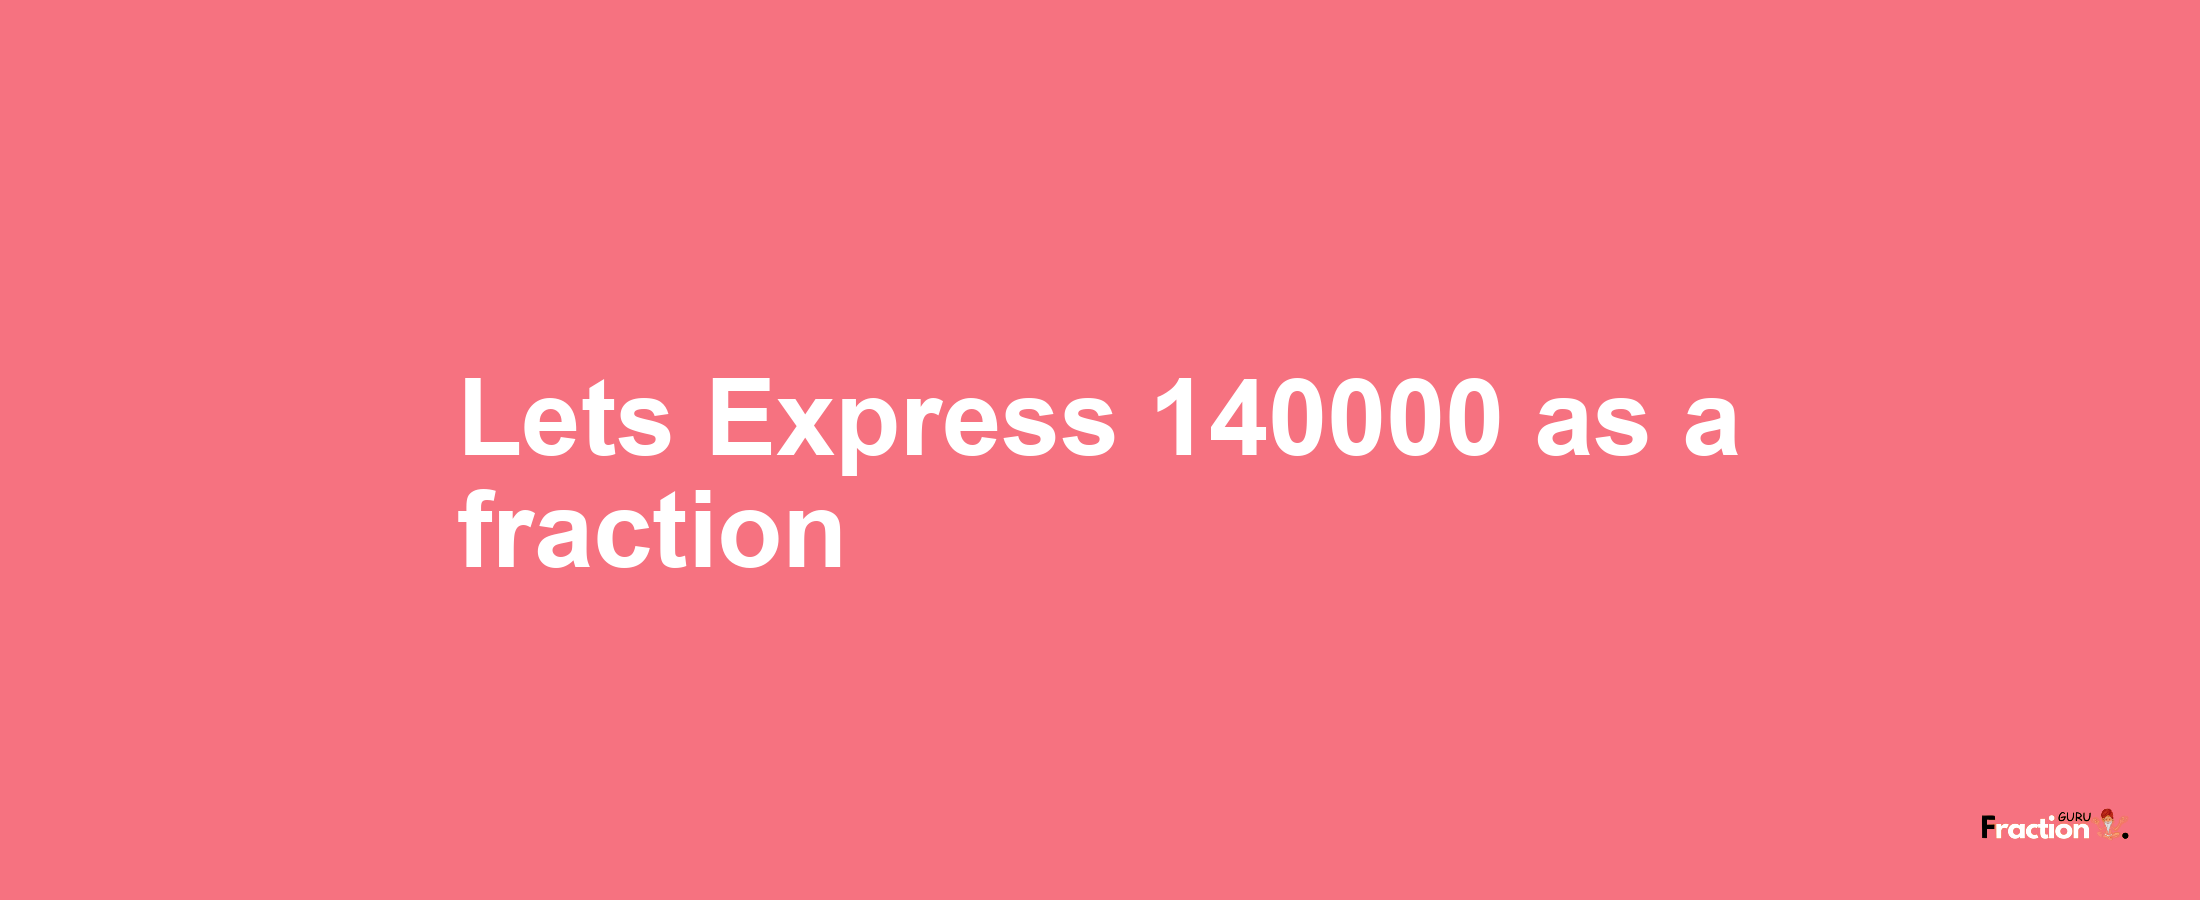 Lets Express 140000 as afraction